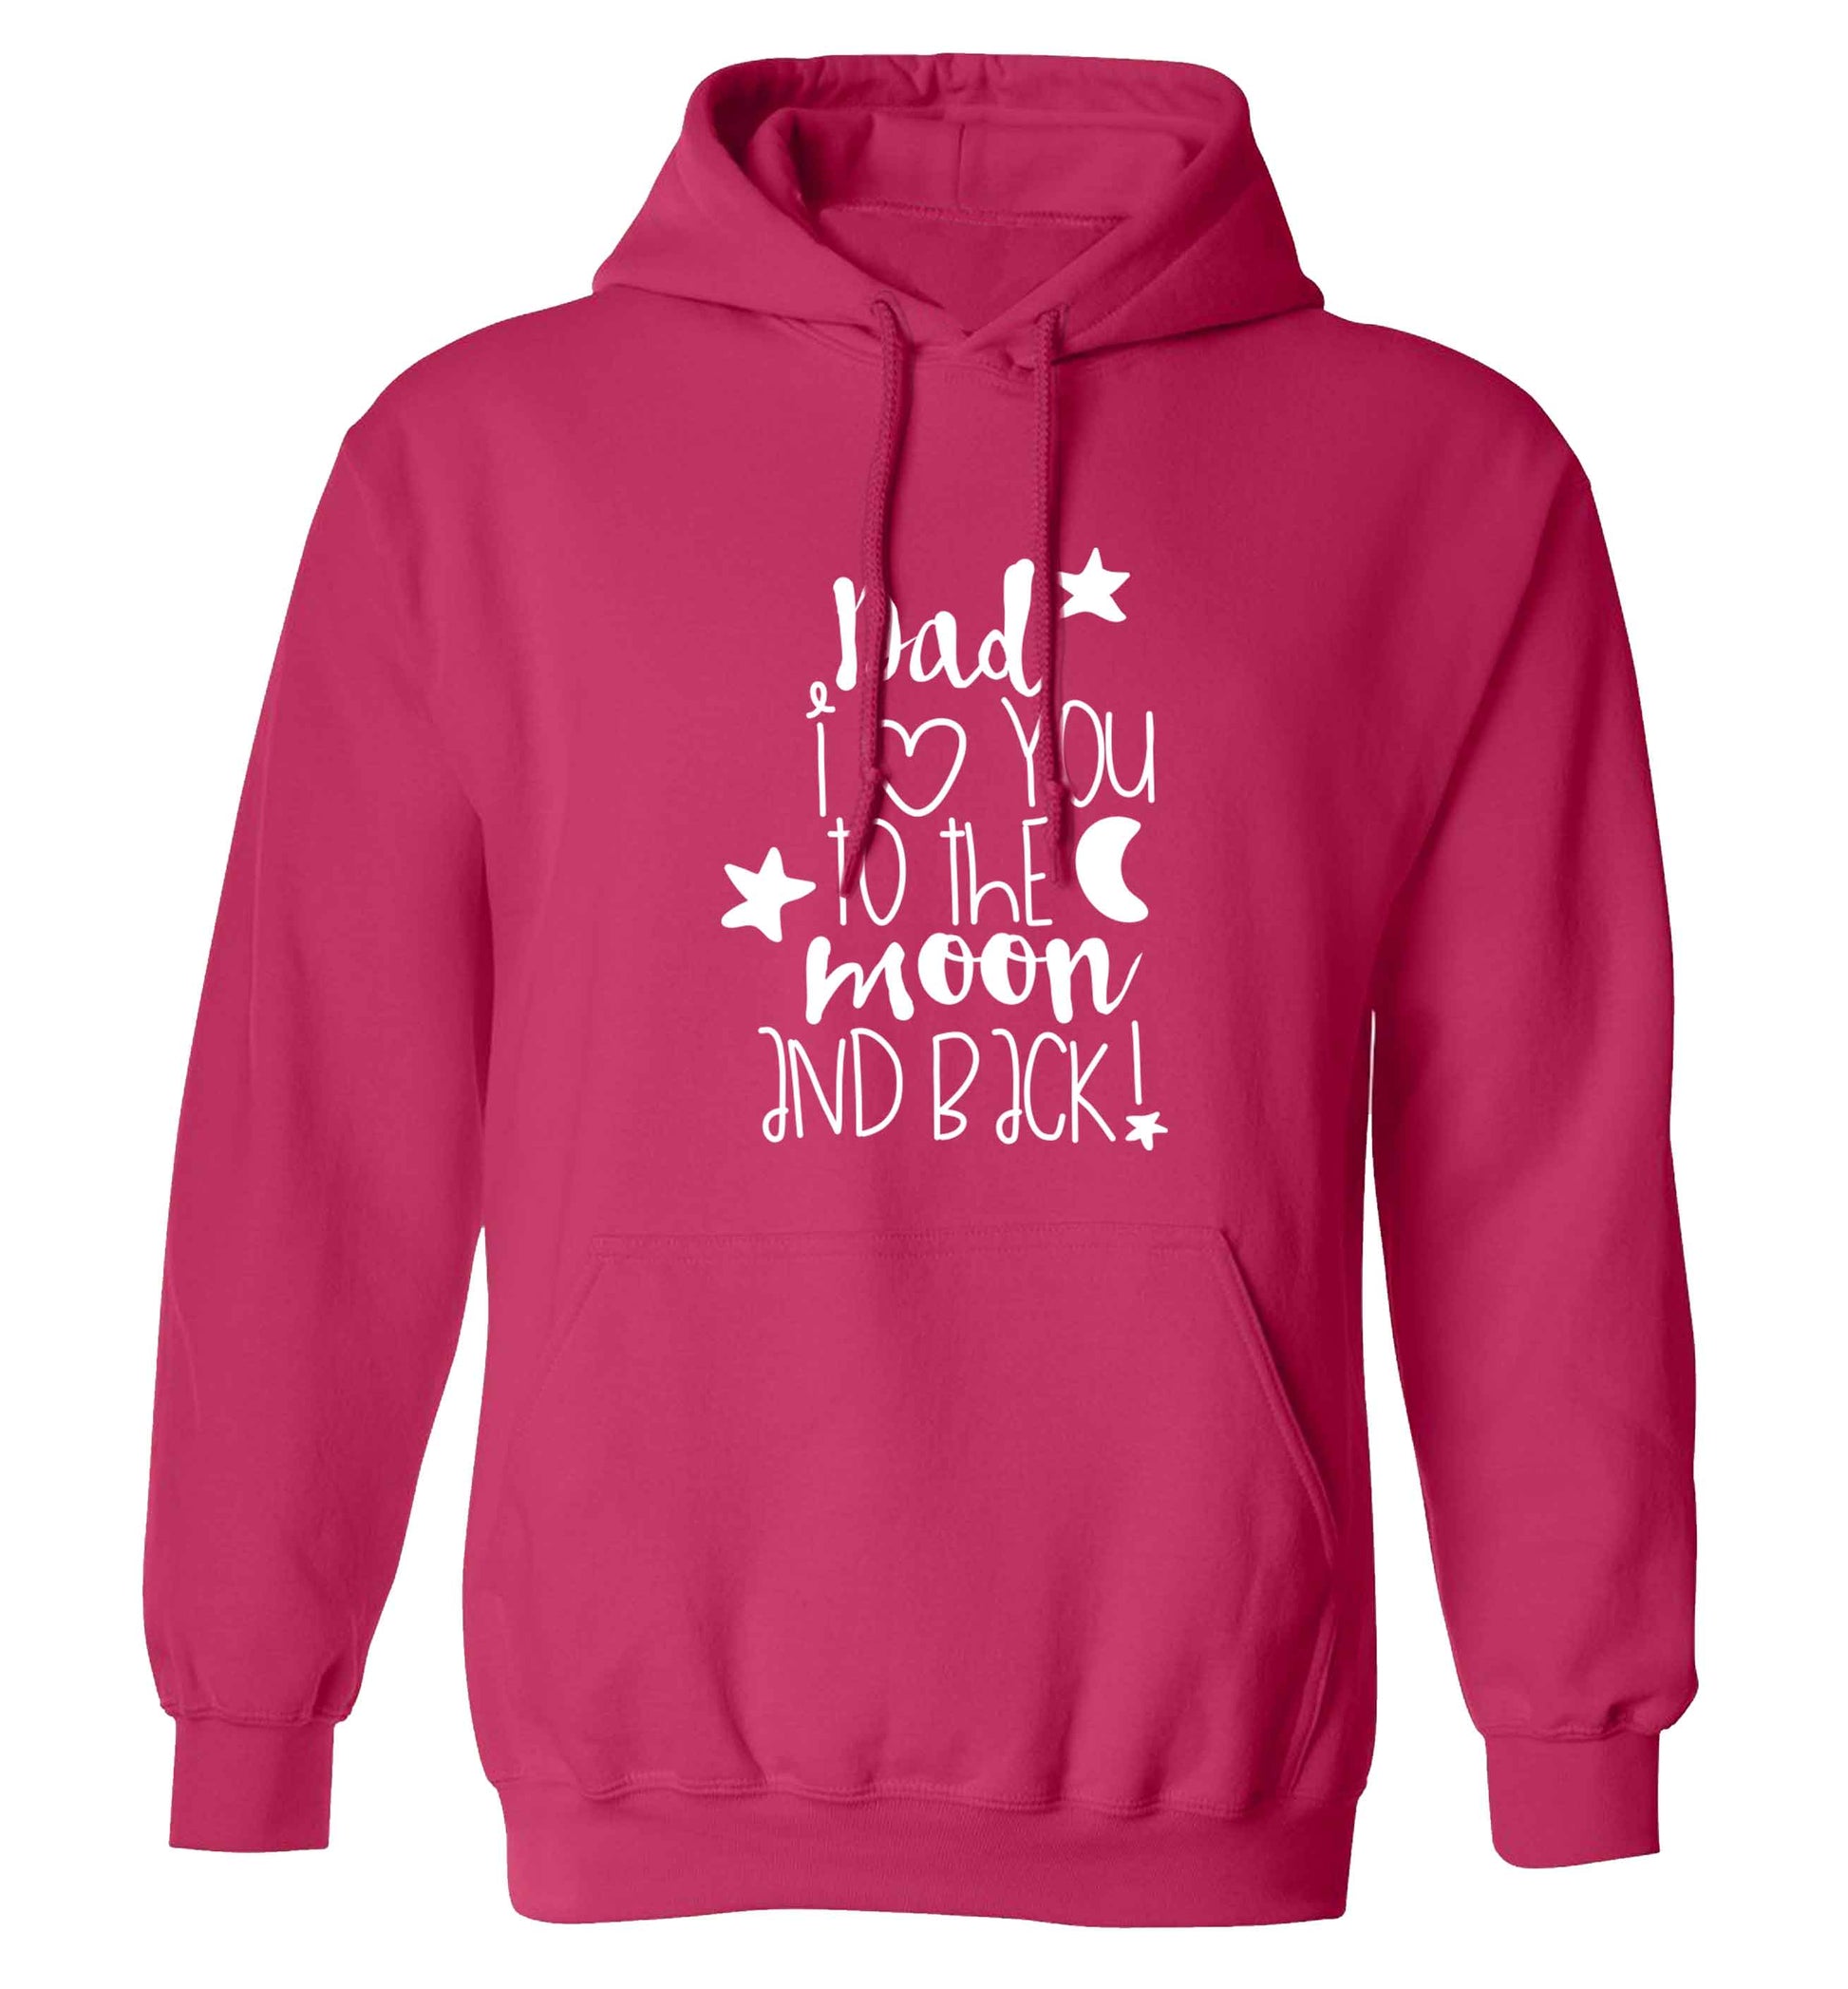 Dad I love you to the moon and back adults unisex pink hoodie 2XL